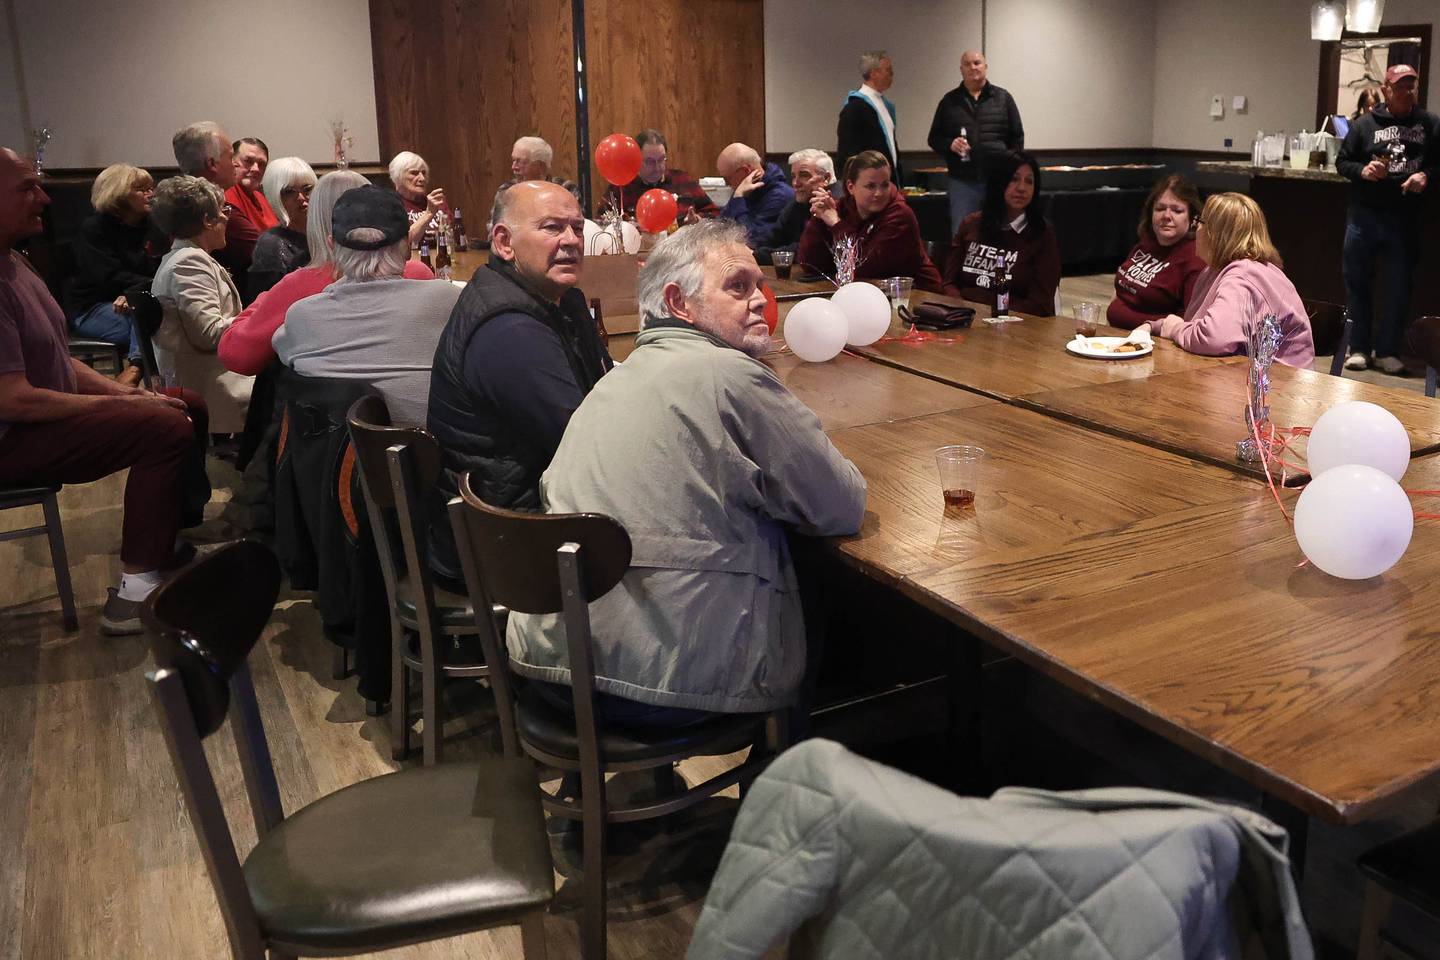 Referendum committee members and supporters gather for the Lockport Township High School District 205 watch party at Coom’s Corner on Tuesday, March 19 in Lockport.